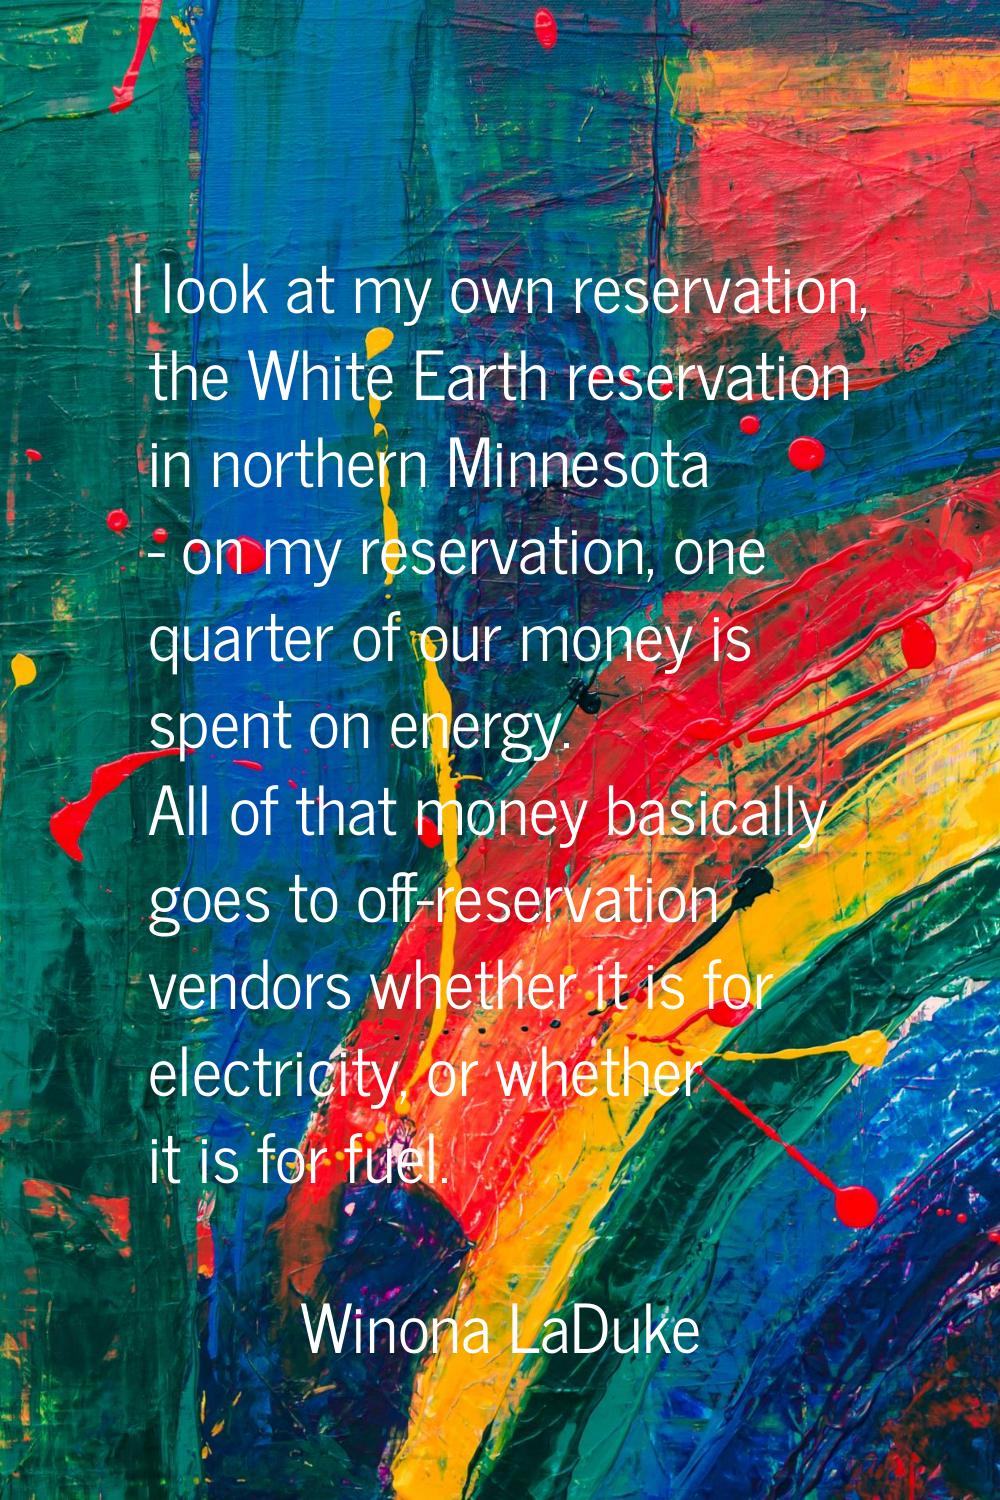 I look at my own reservation, the White Earth reservation in northern Minnesota - on my reservation